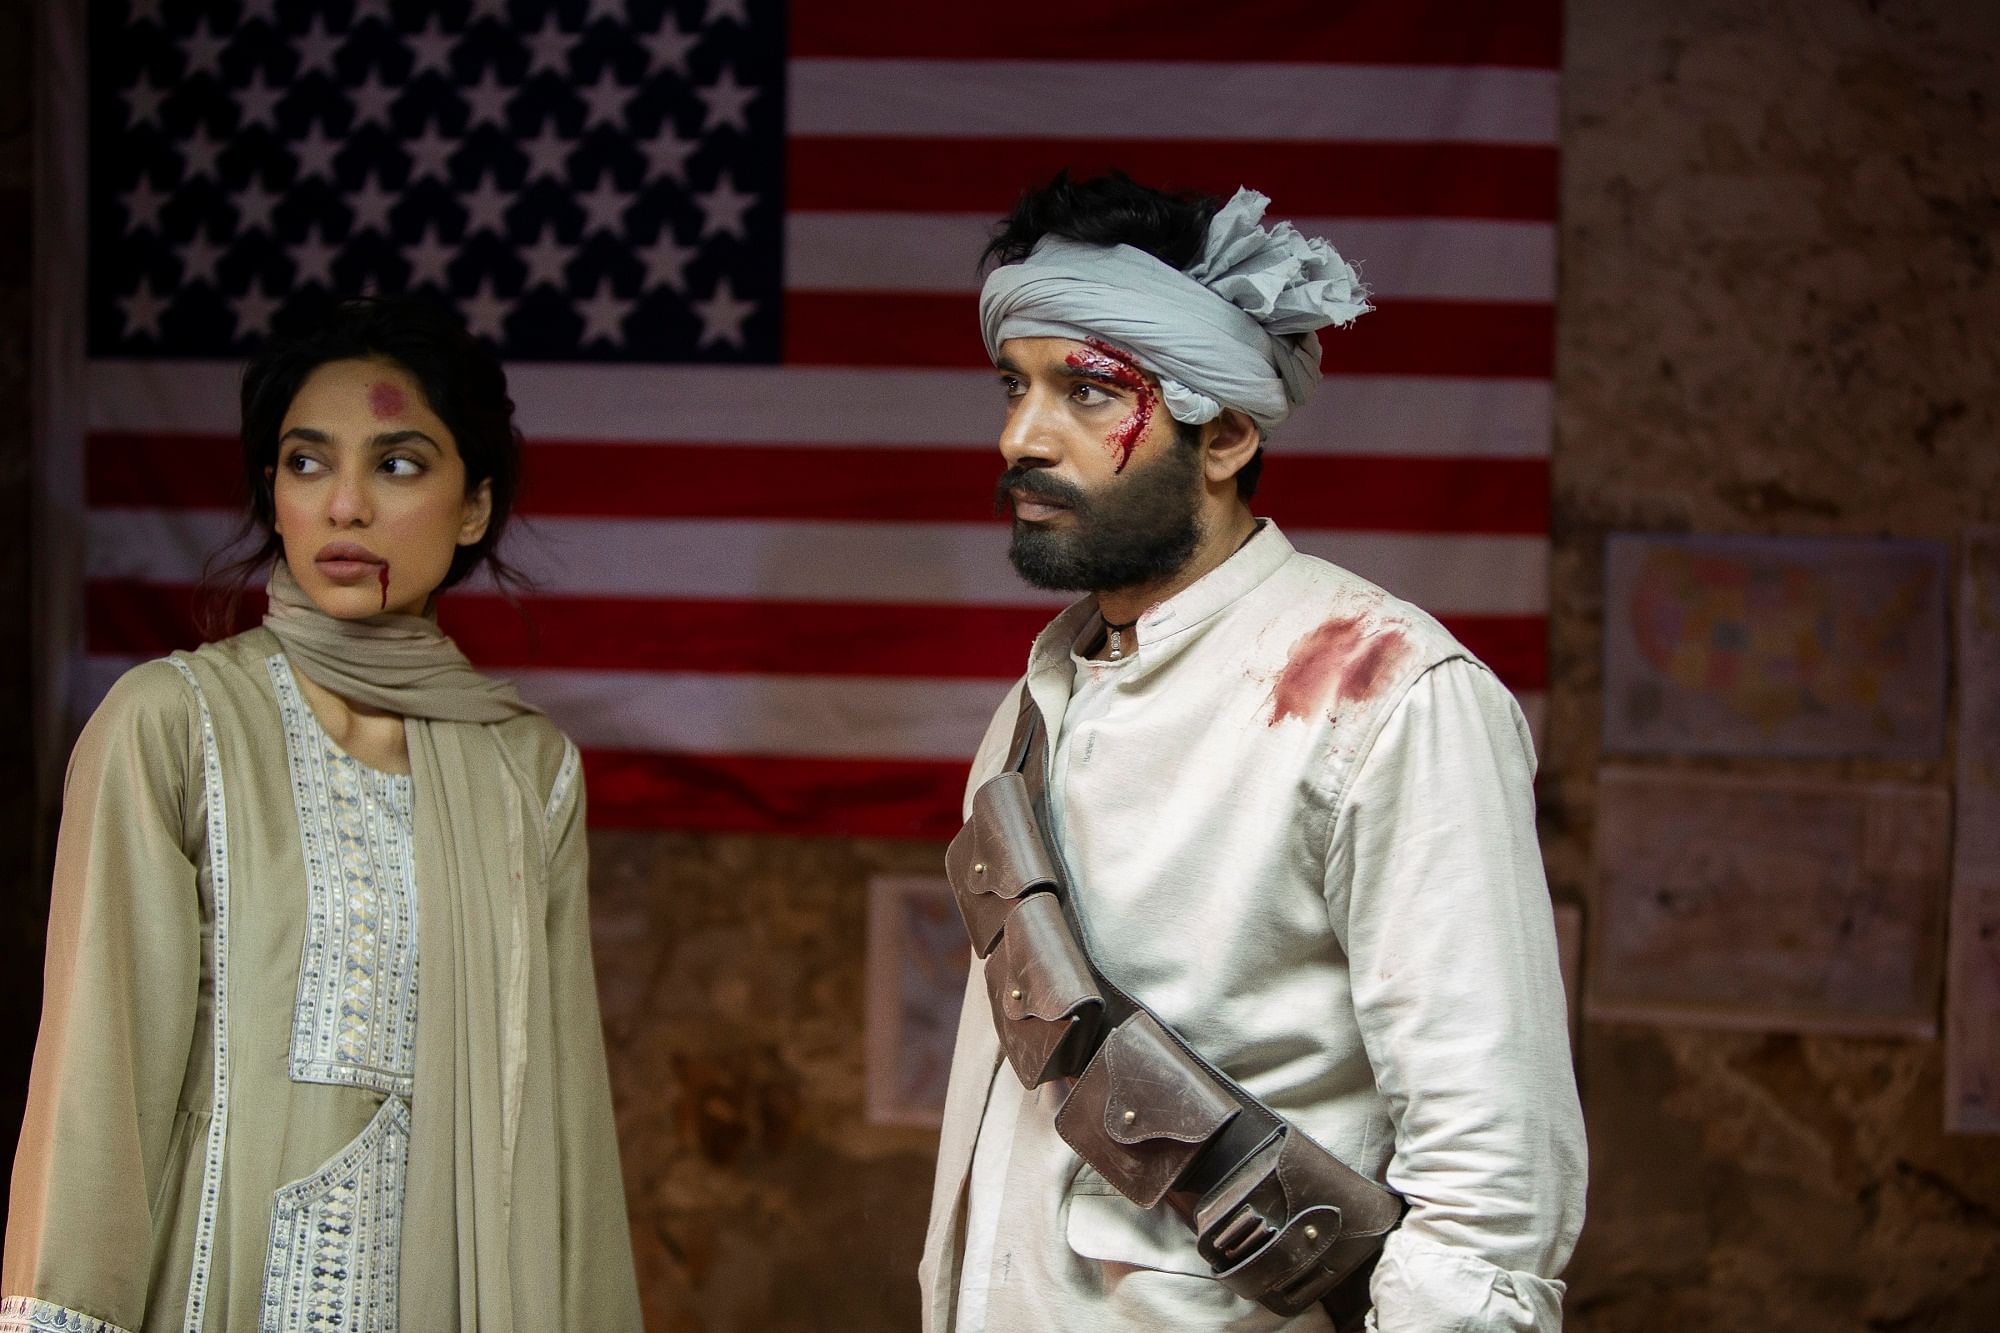 Sobhita Dhulipala and Vineet Kumar Singh in a scene from ‘Bard of Blood’, which dropped on Netflix on September 27.